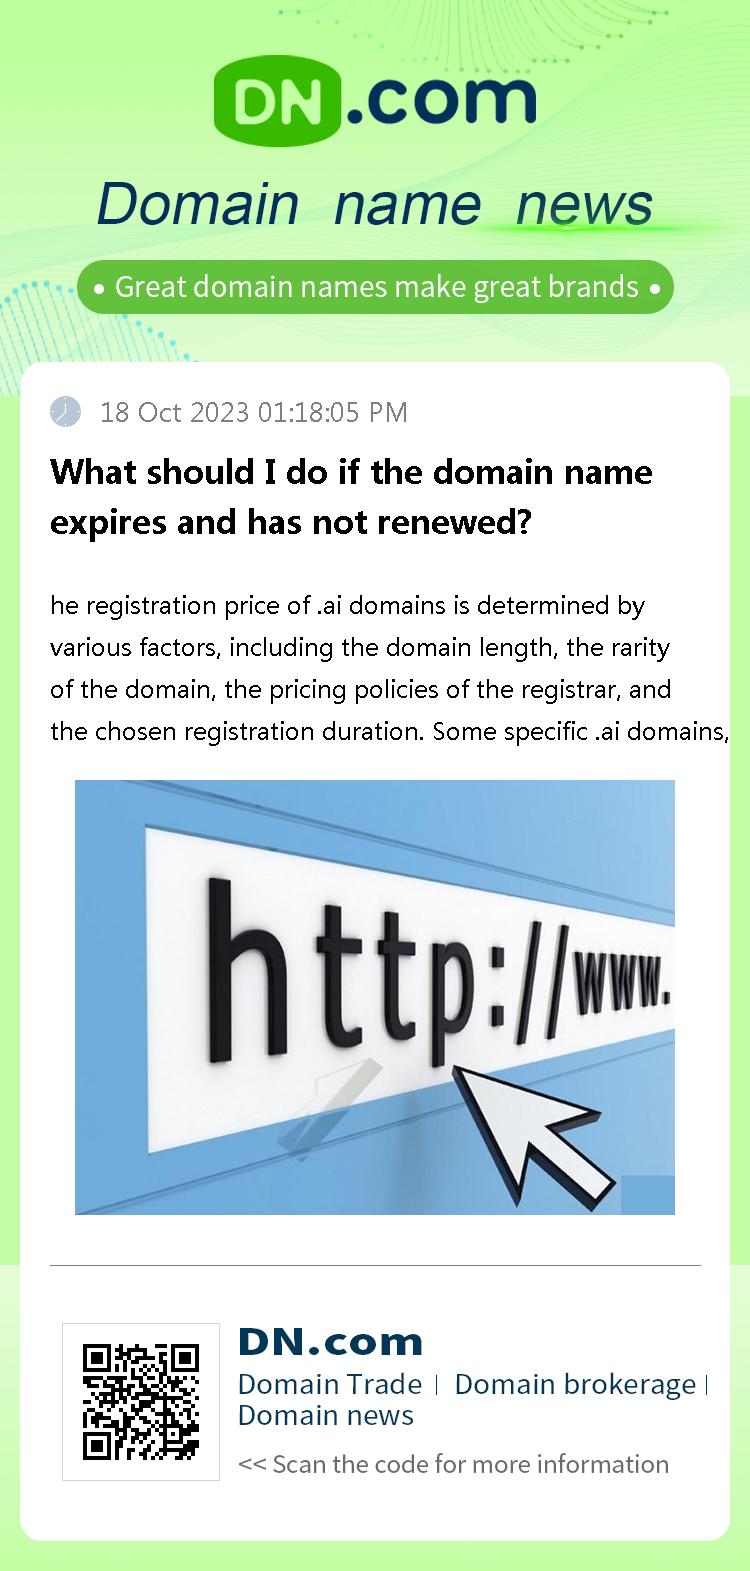 What should I do if the domain name expires and has not renewed?